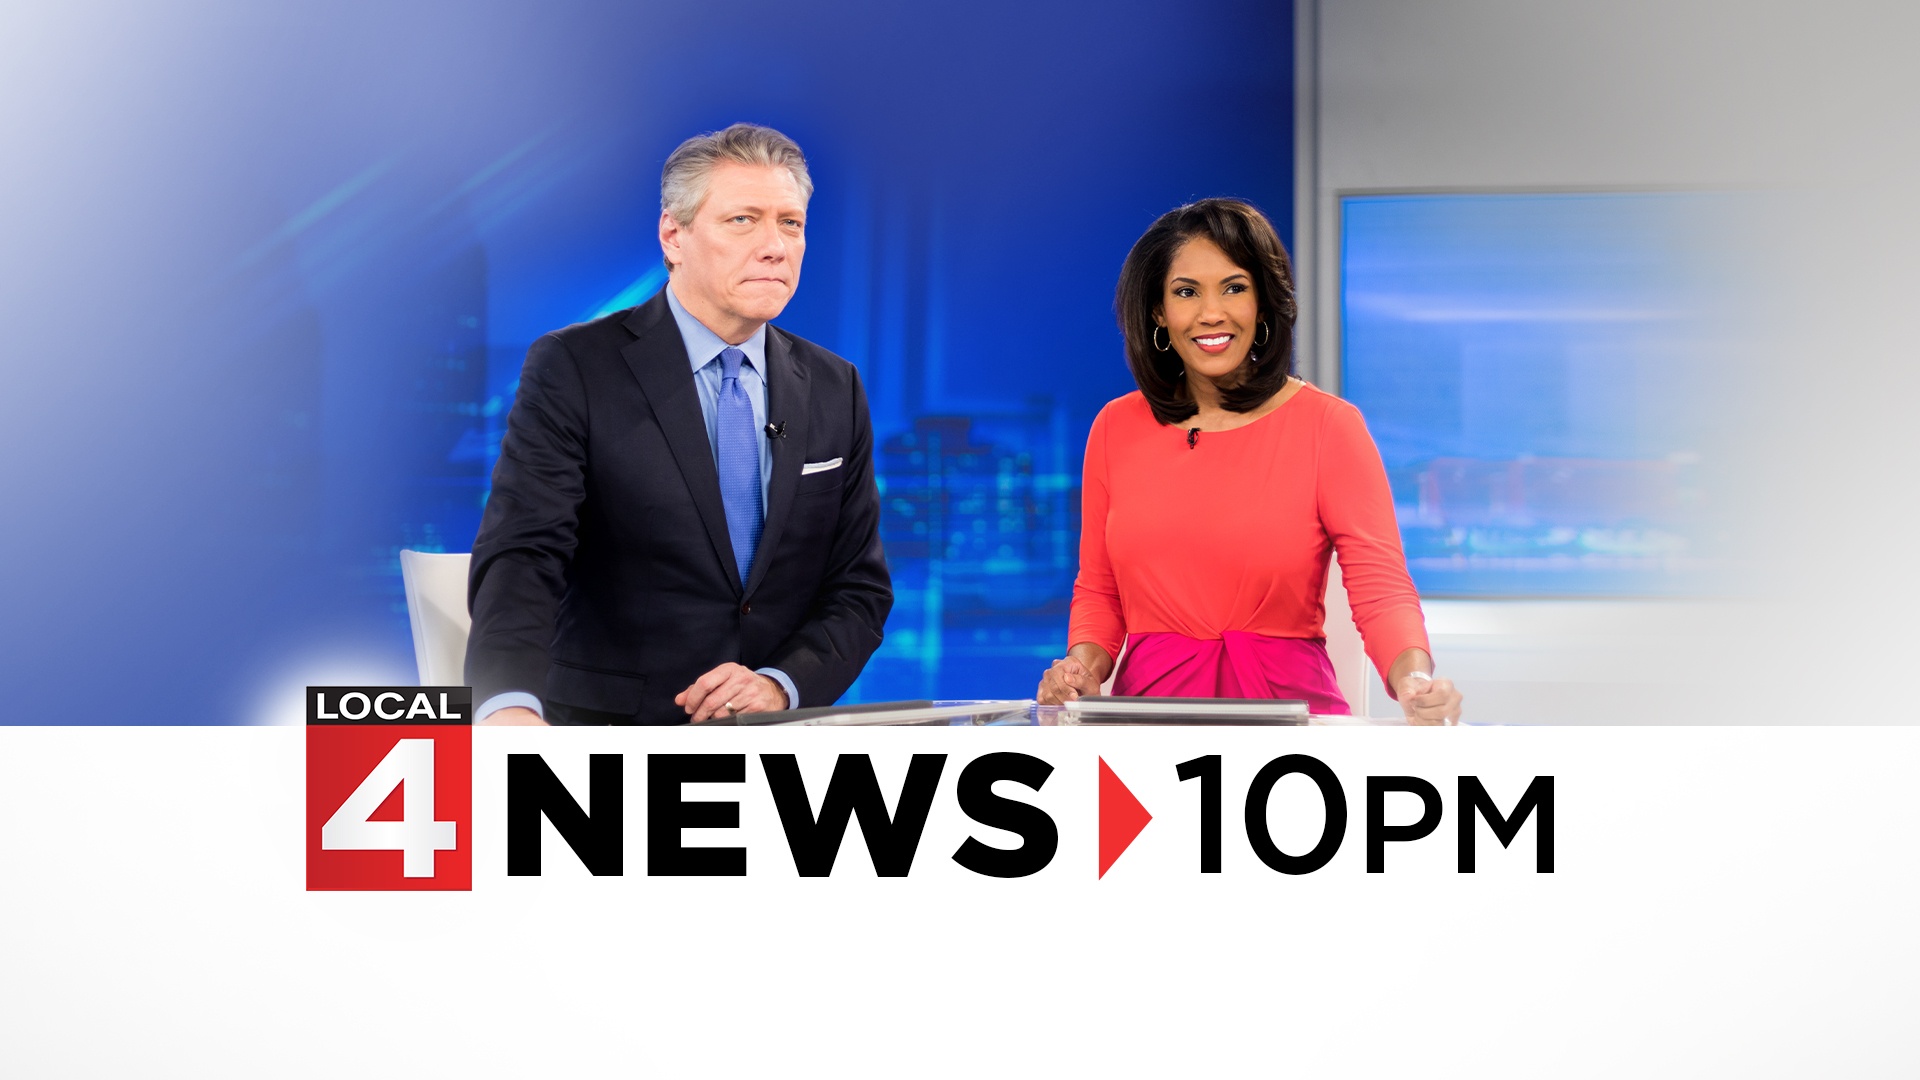 Watch: Local 4 News at 10 p.m. on Local 4+